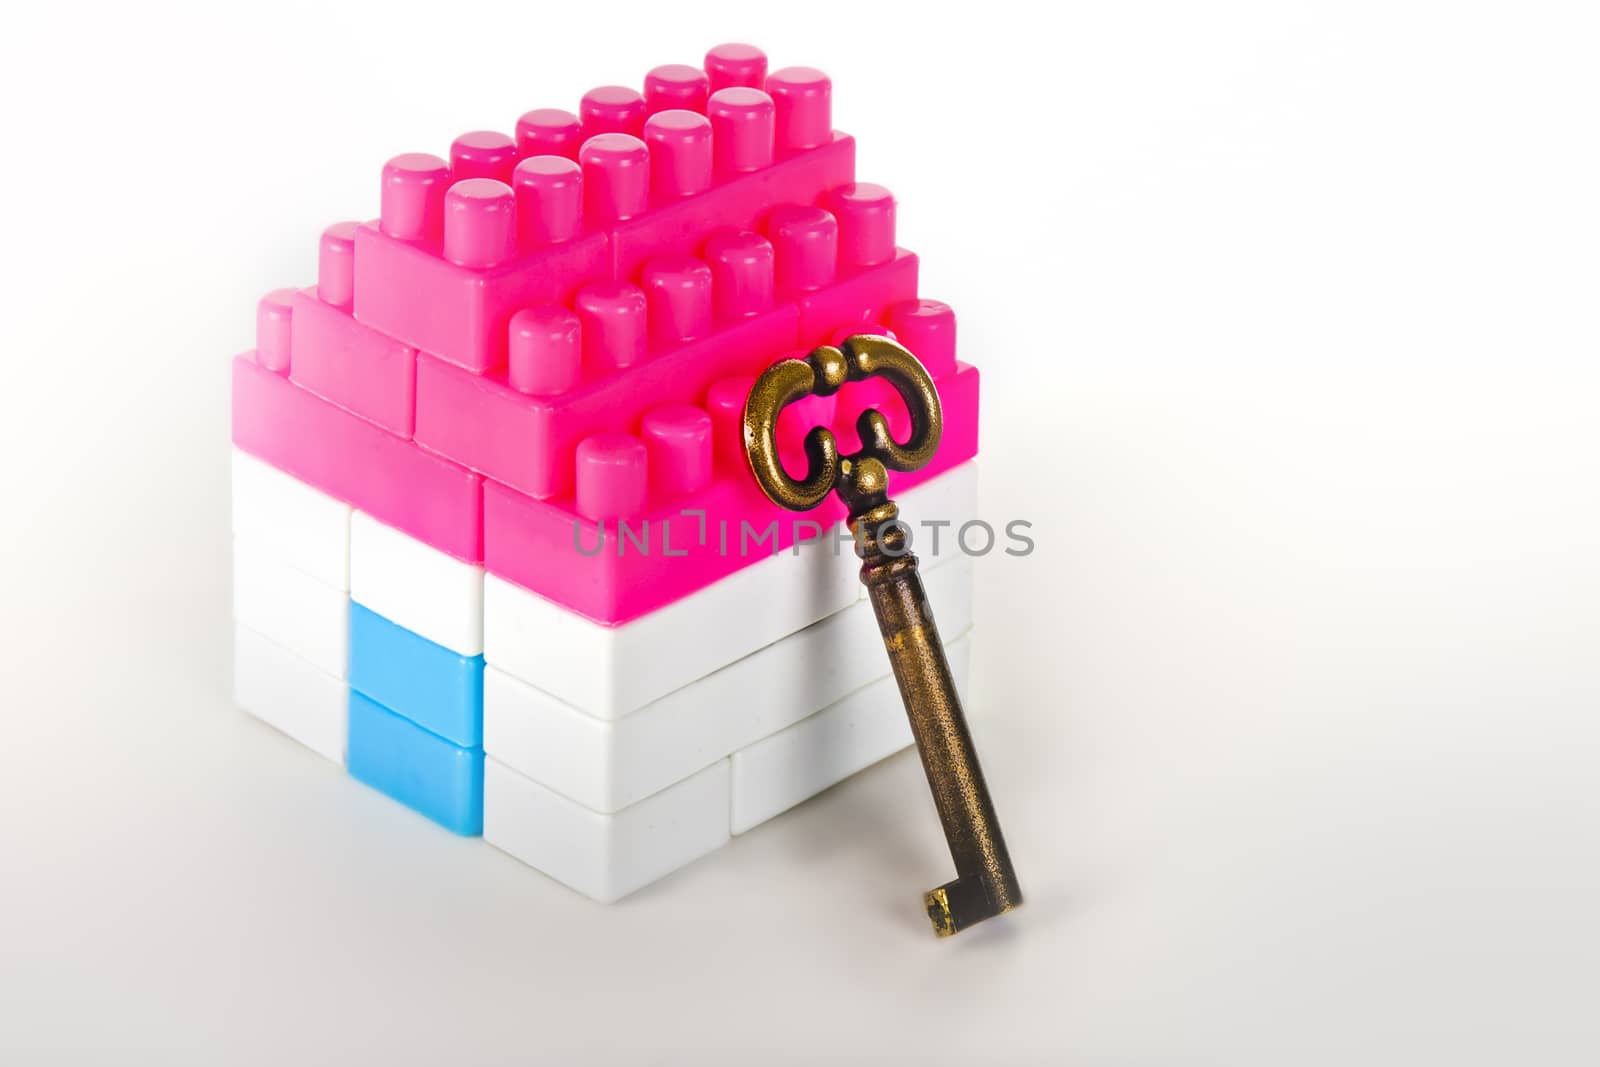 Miniature House with Key by ocusfocus